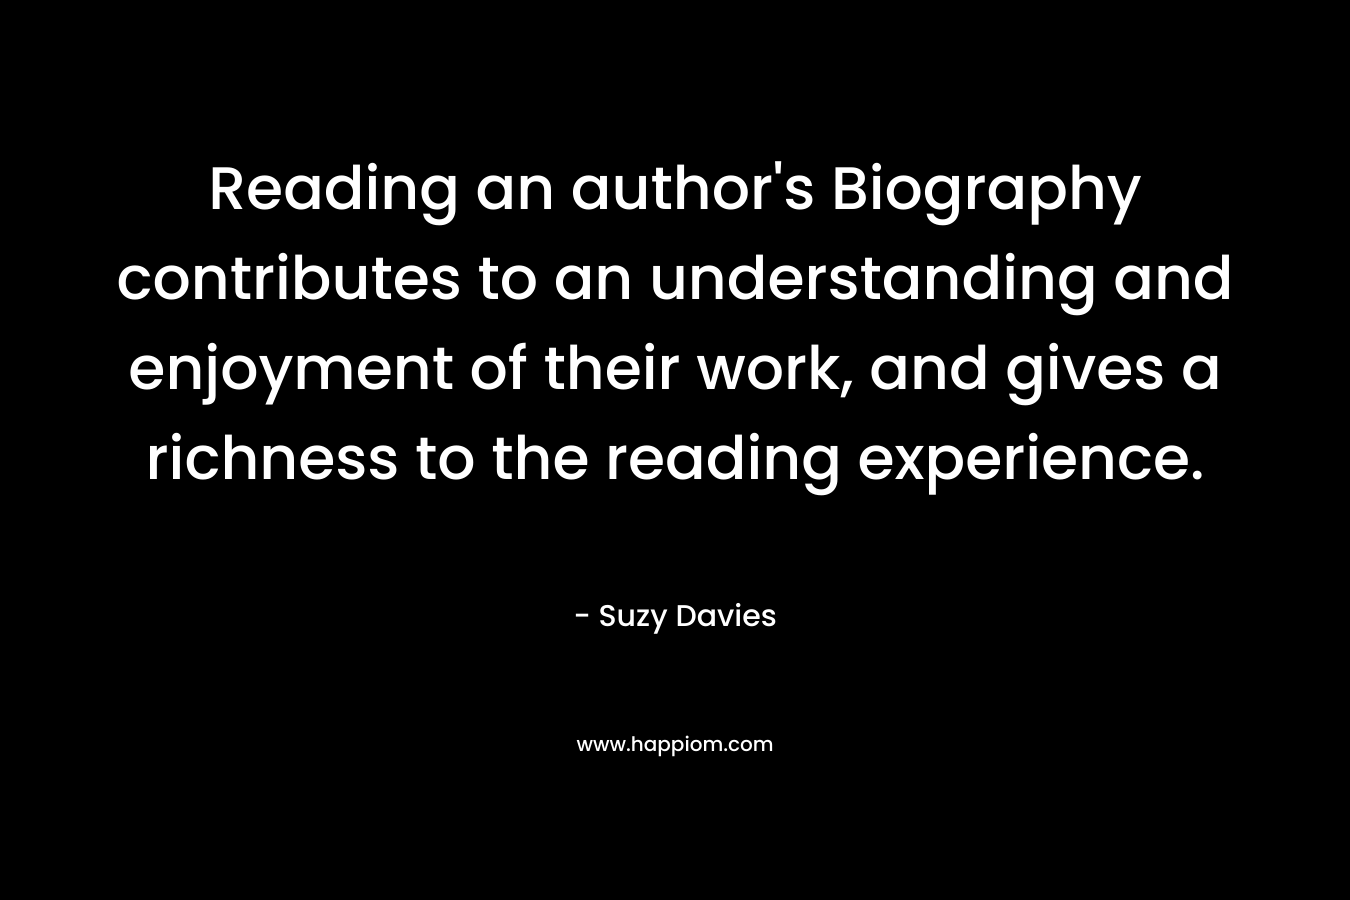 Reading an author’s Biography contributes to an understanding and enjoyment of their work, and gives a richness to the reading experience. – Suzy  Davies